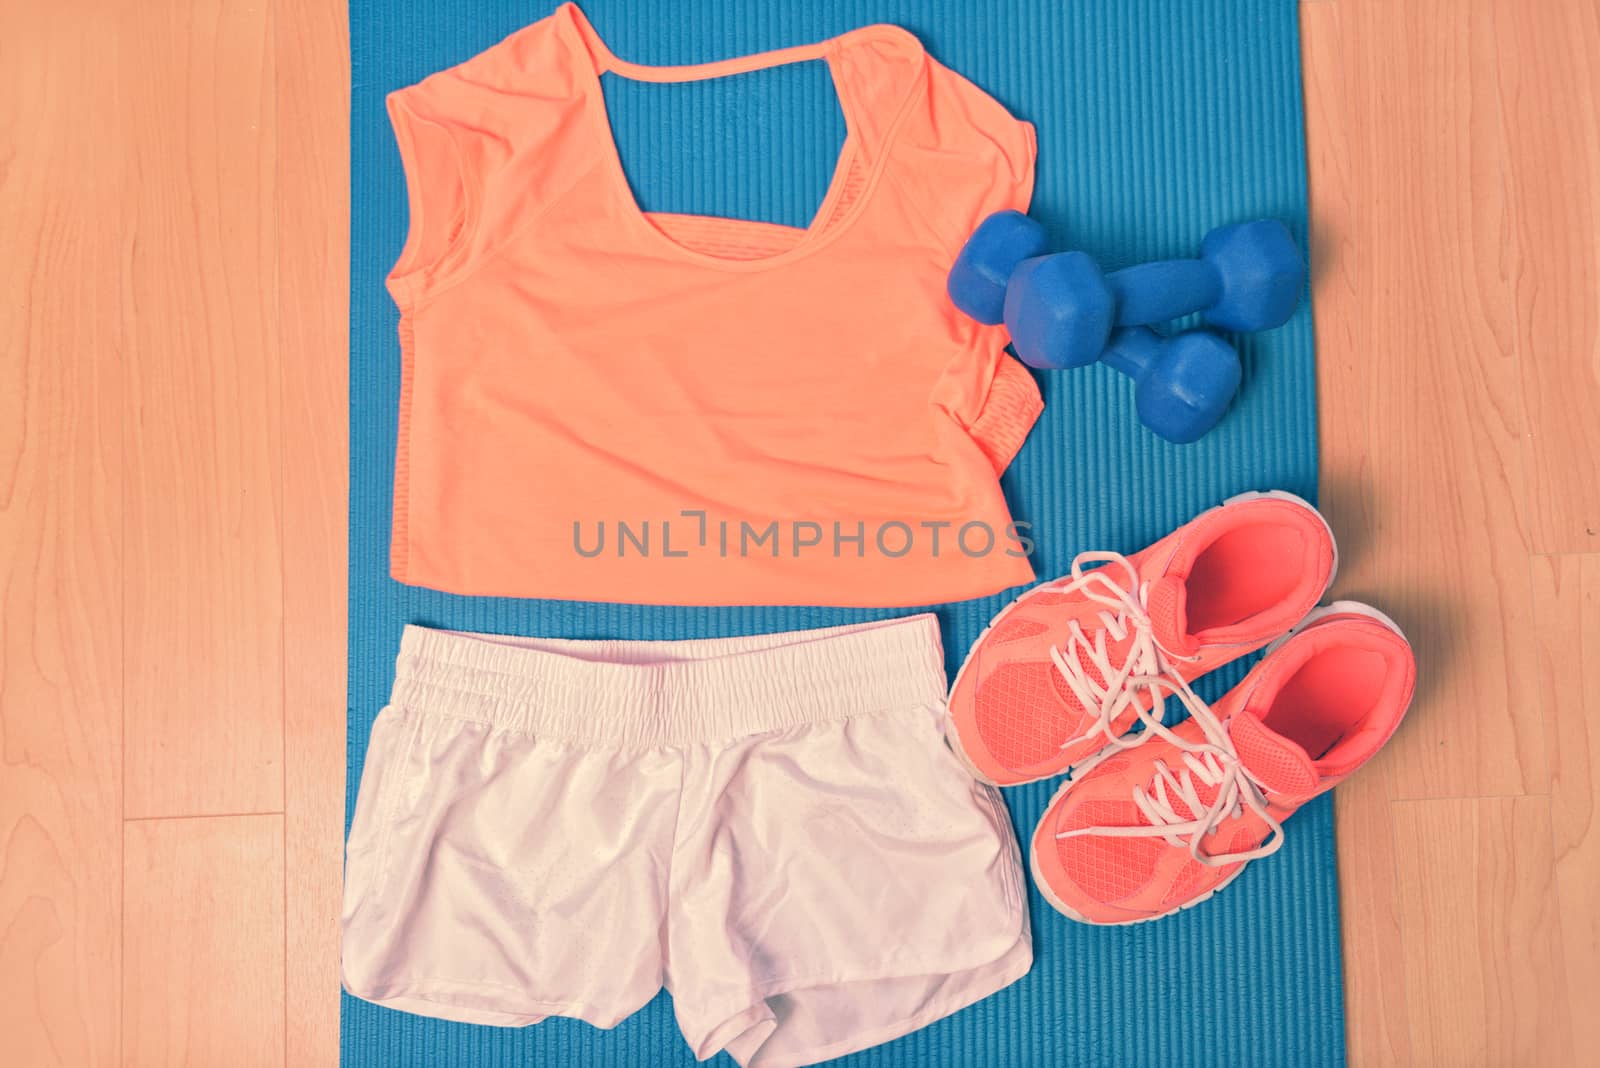 Workout clothes - fitness outfit and running shoes by Maridav